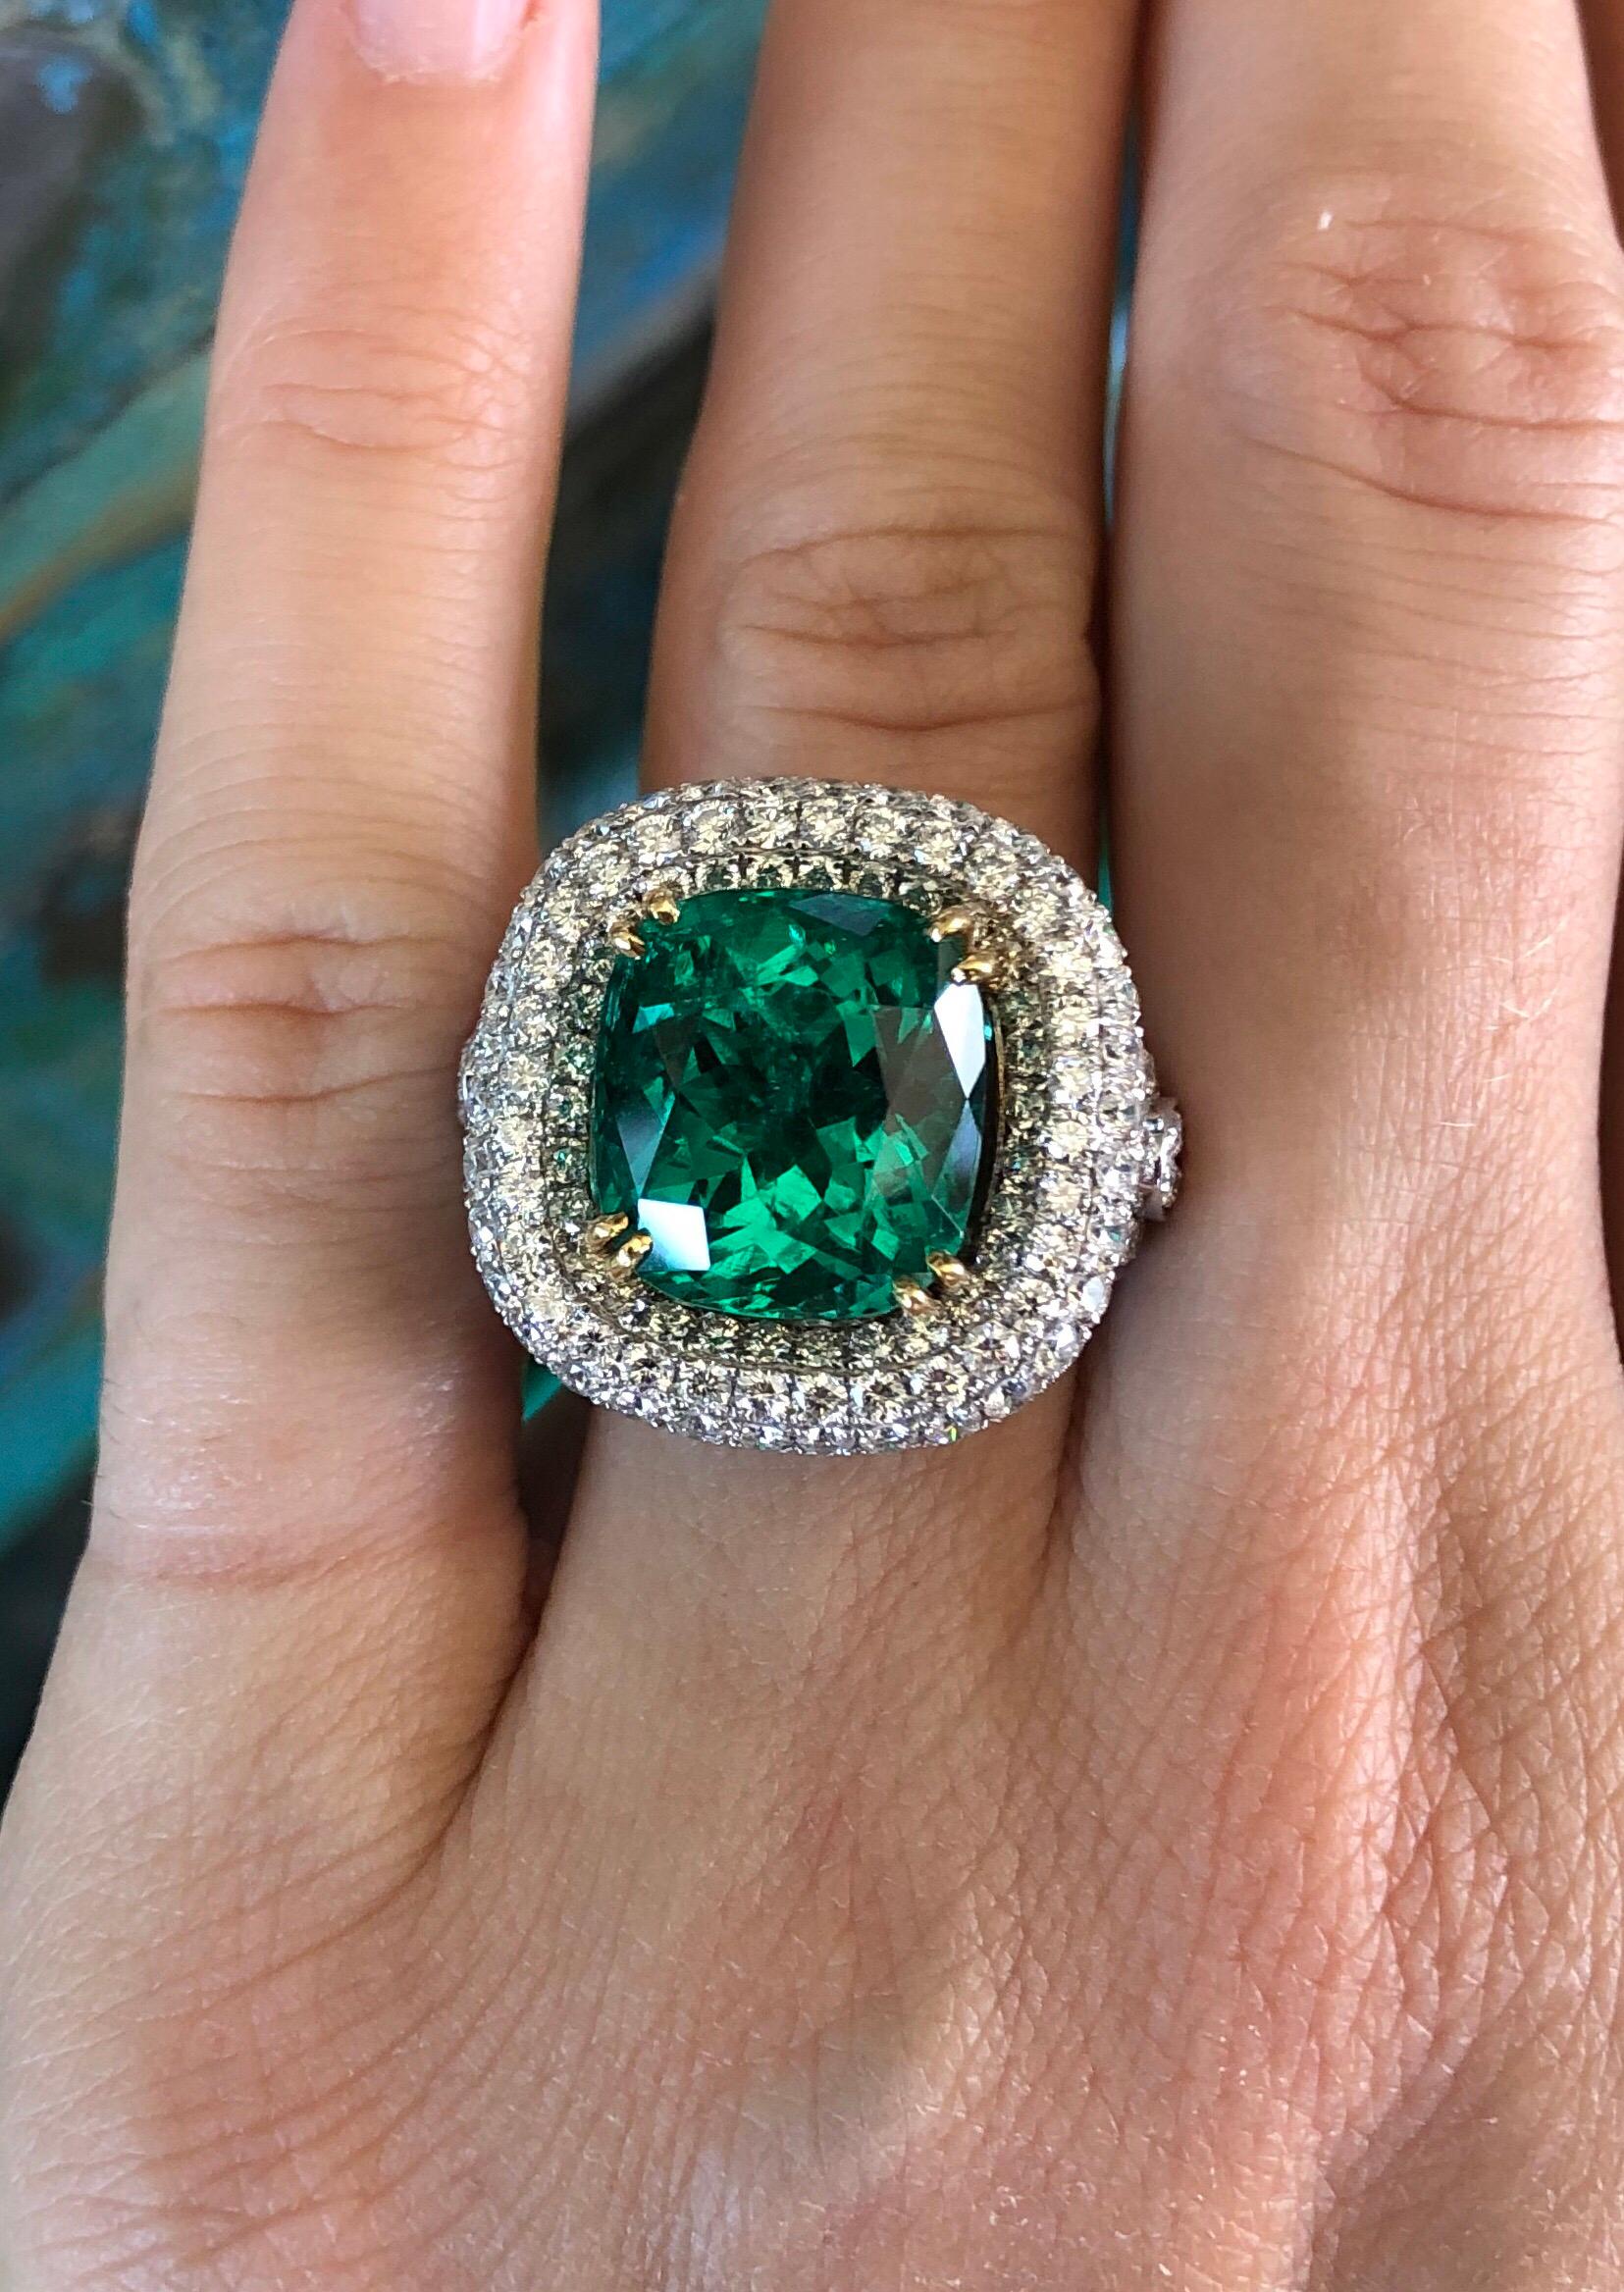 Contemporary Colombian Emerald Ring 9.07 Carat Gubelin Certified